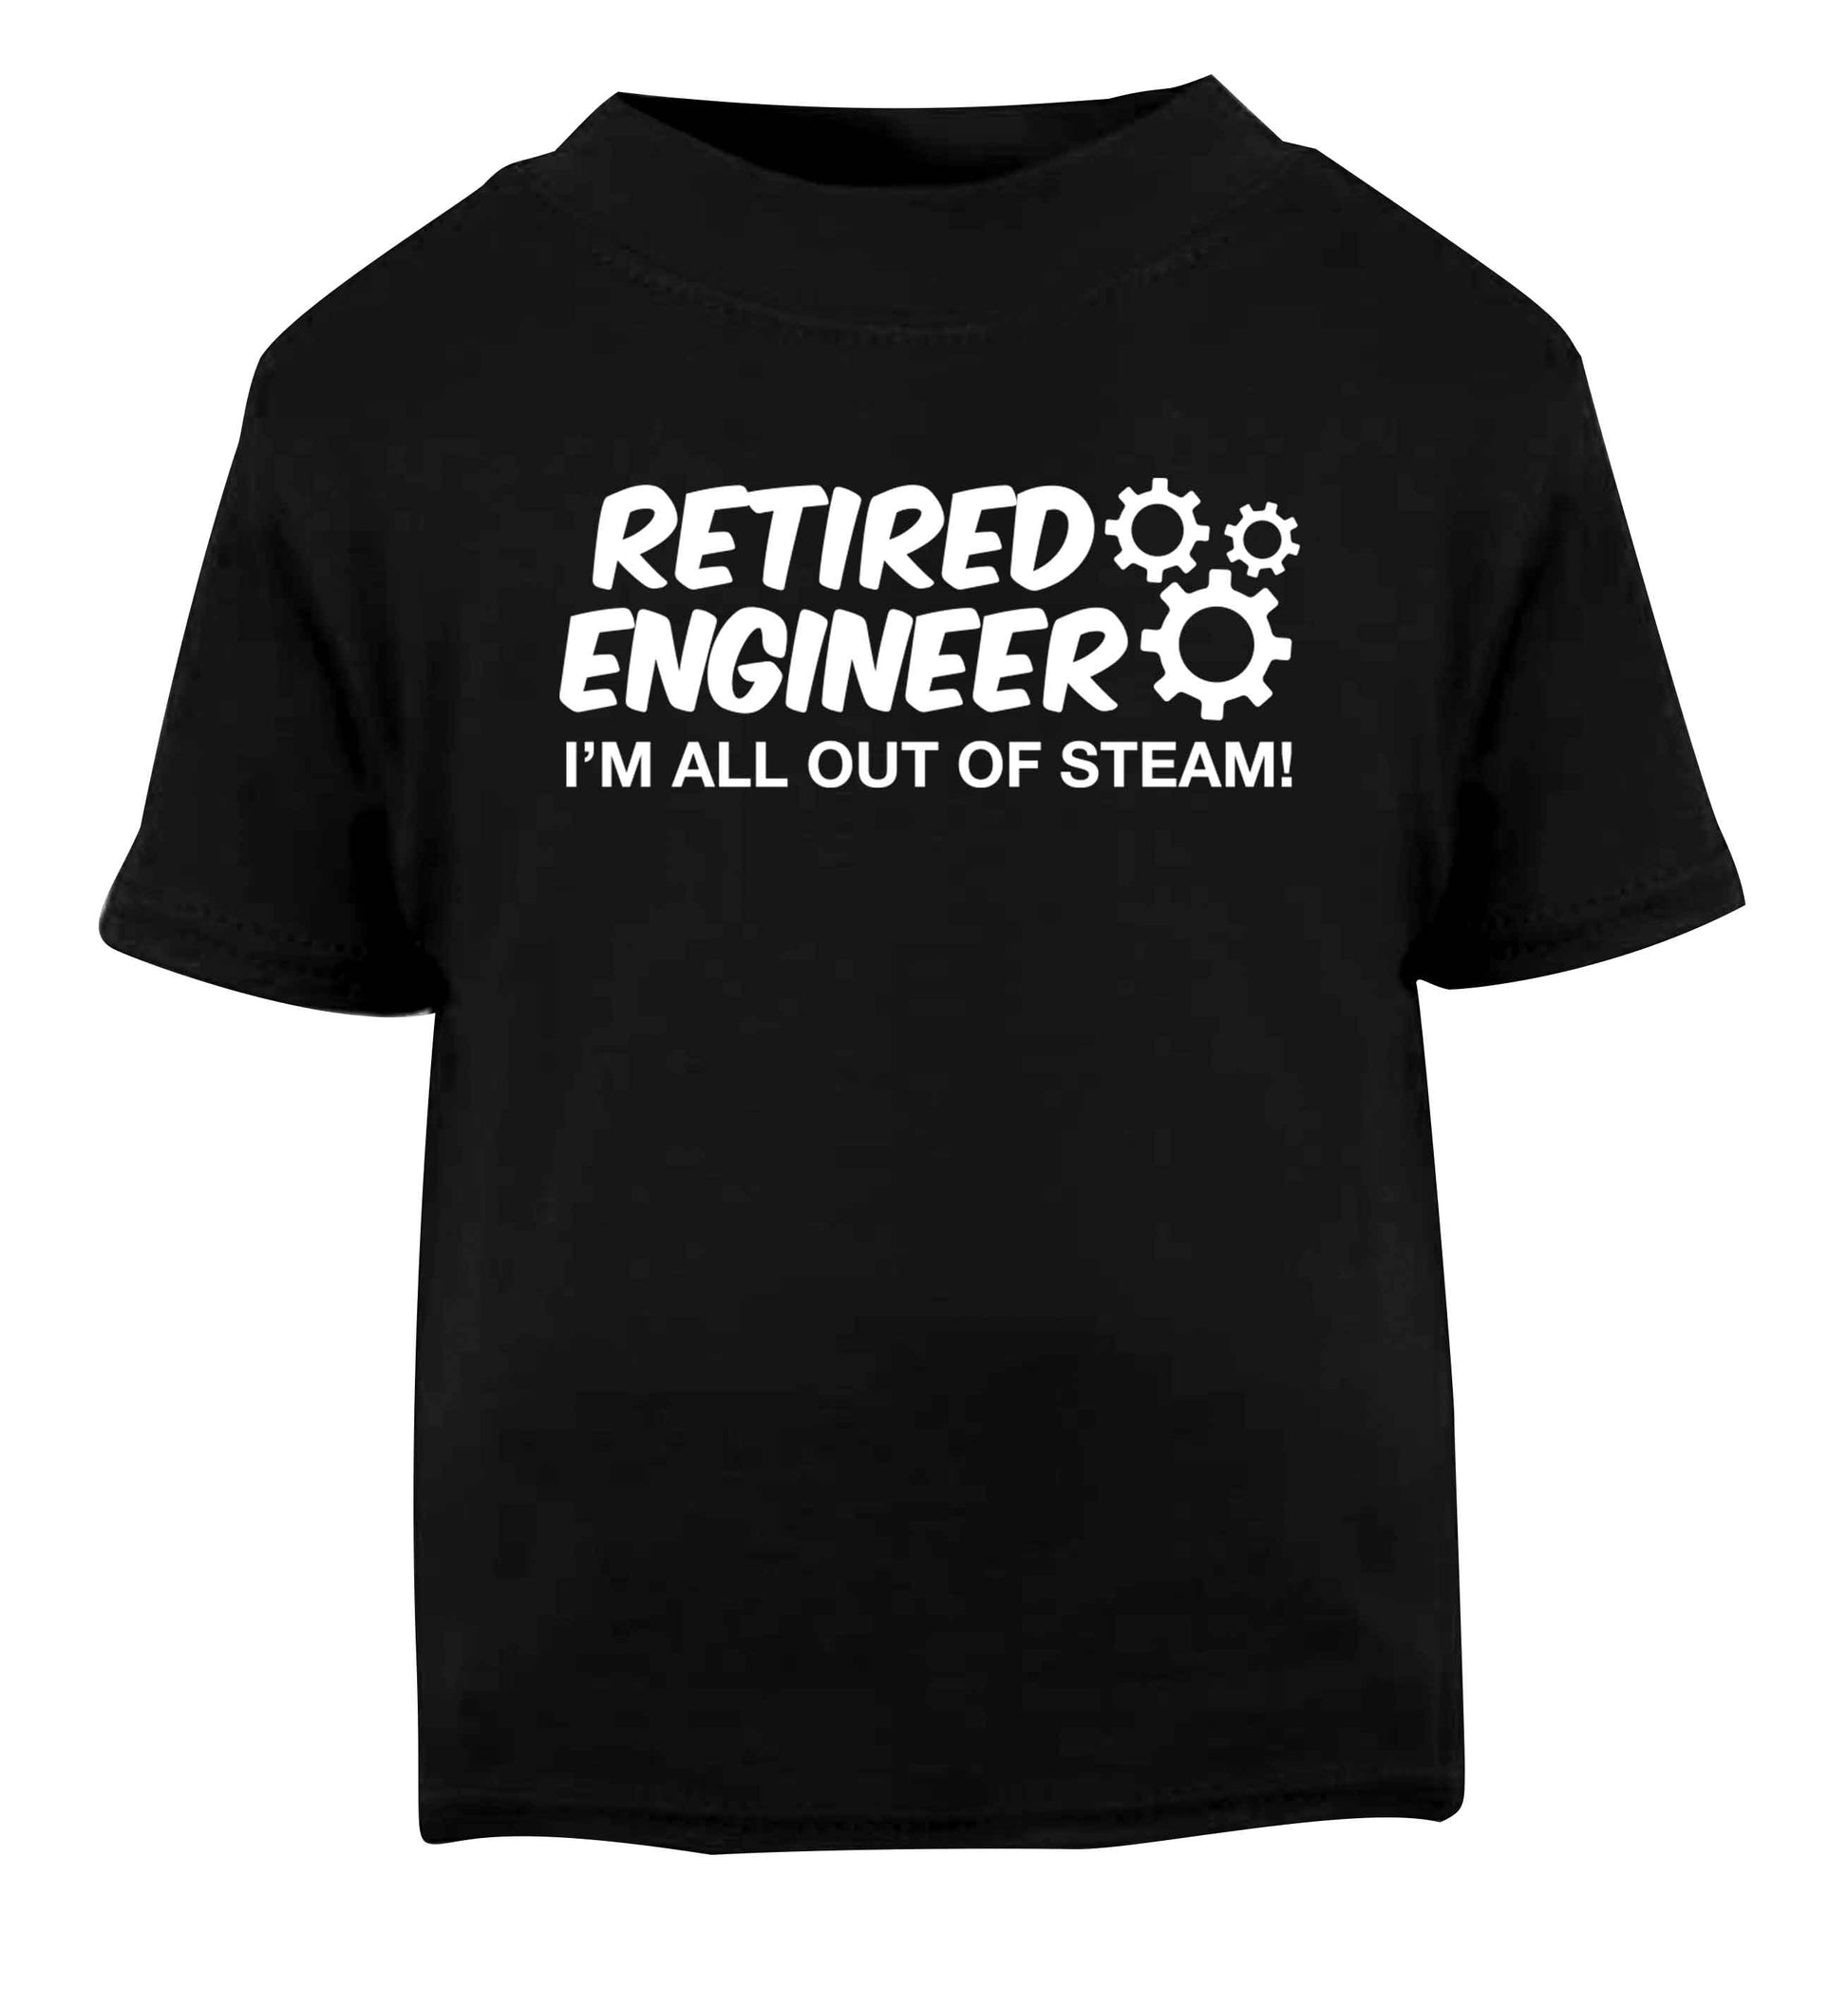 Retired engineer I'm all out of steam Black Baby Toddler Tshirt 2 years